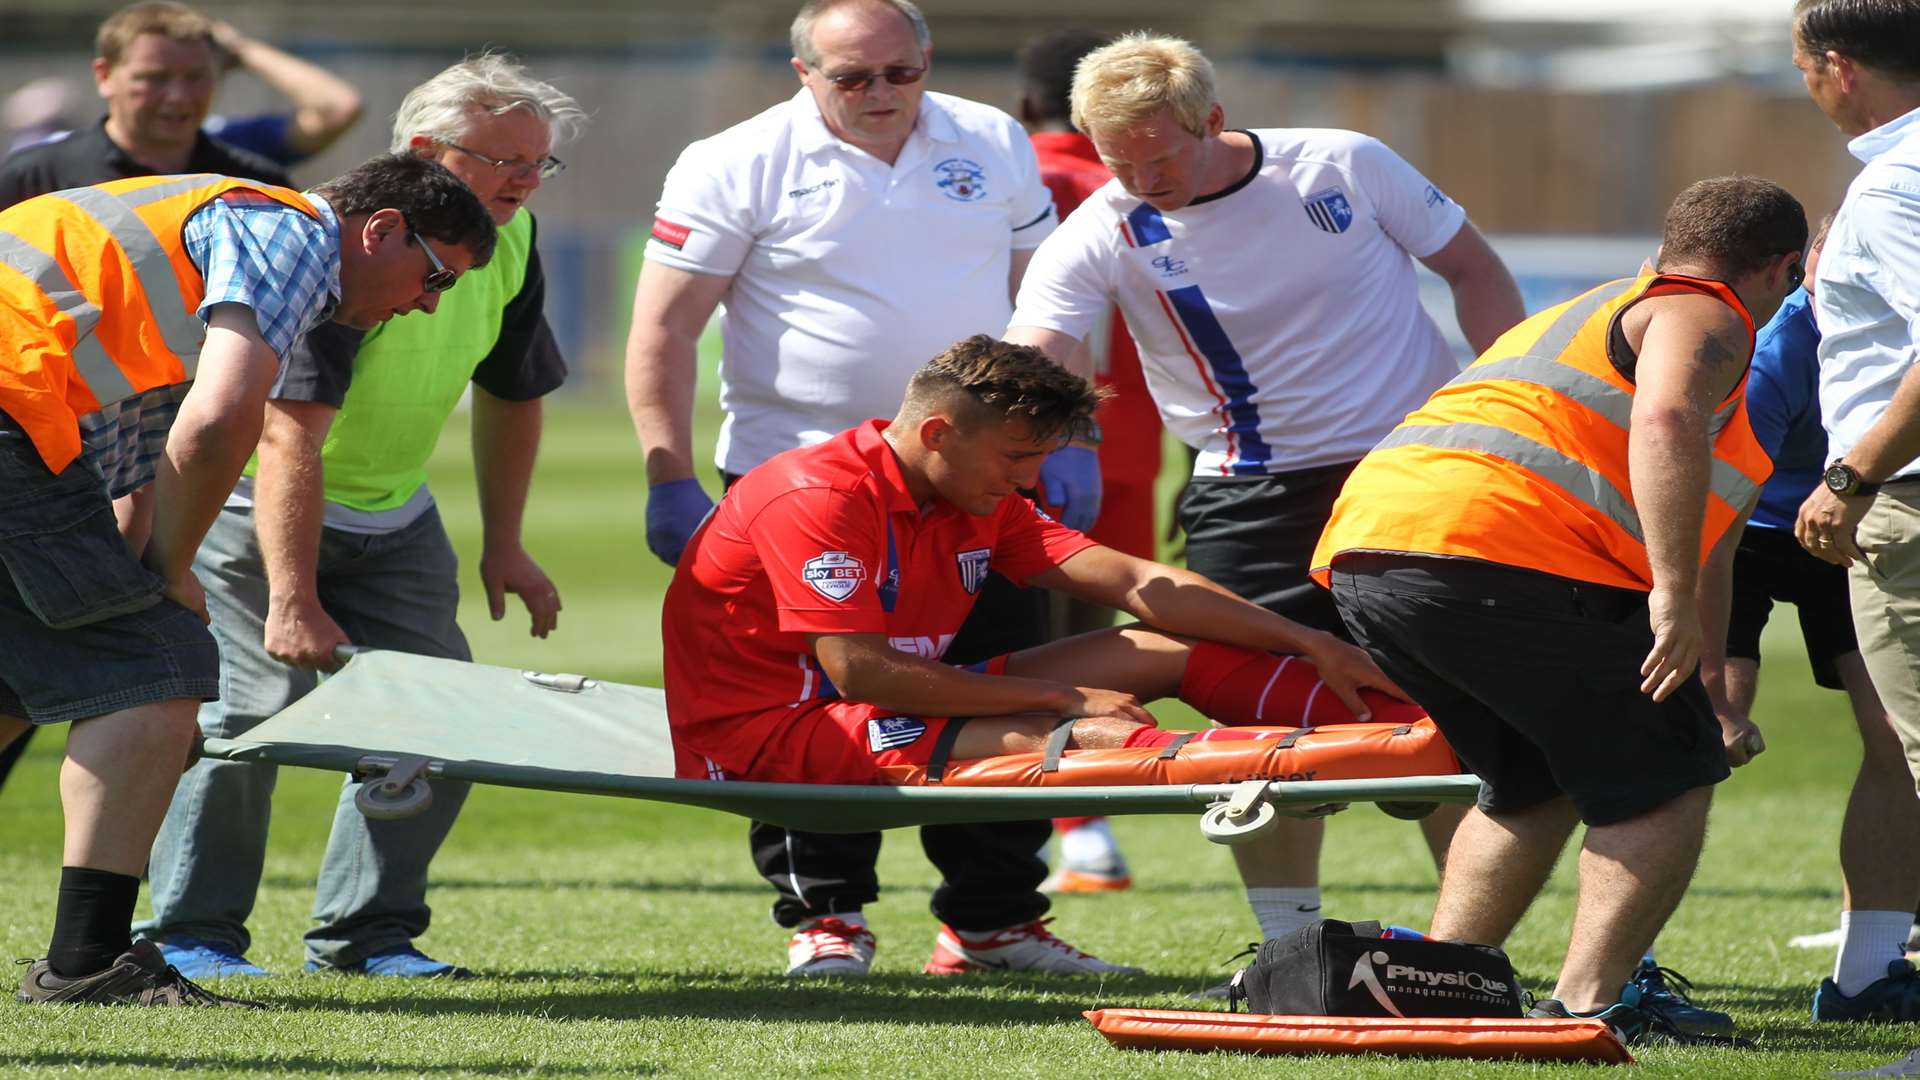 Josh Hare is stretchered off playing for Gillingham in a pre-season friendly at Tonbridge in 2015